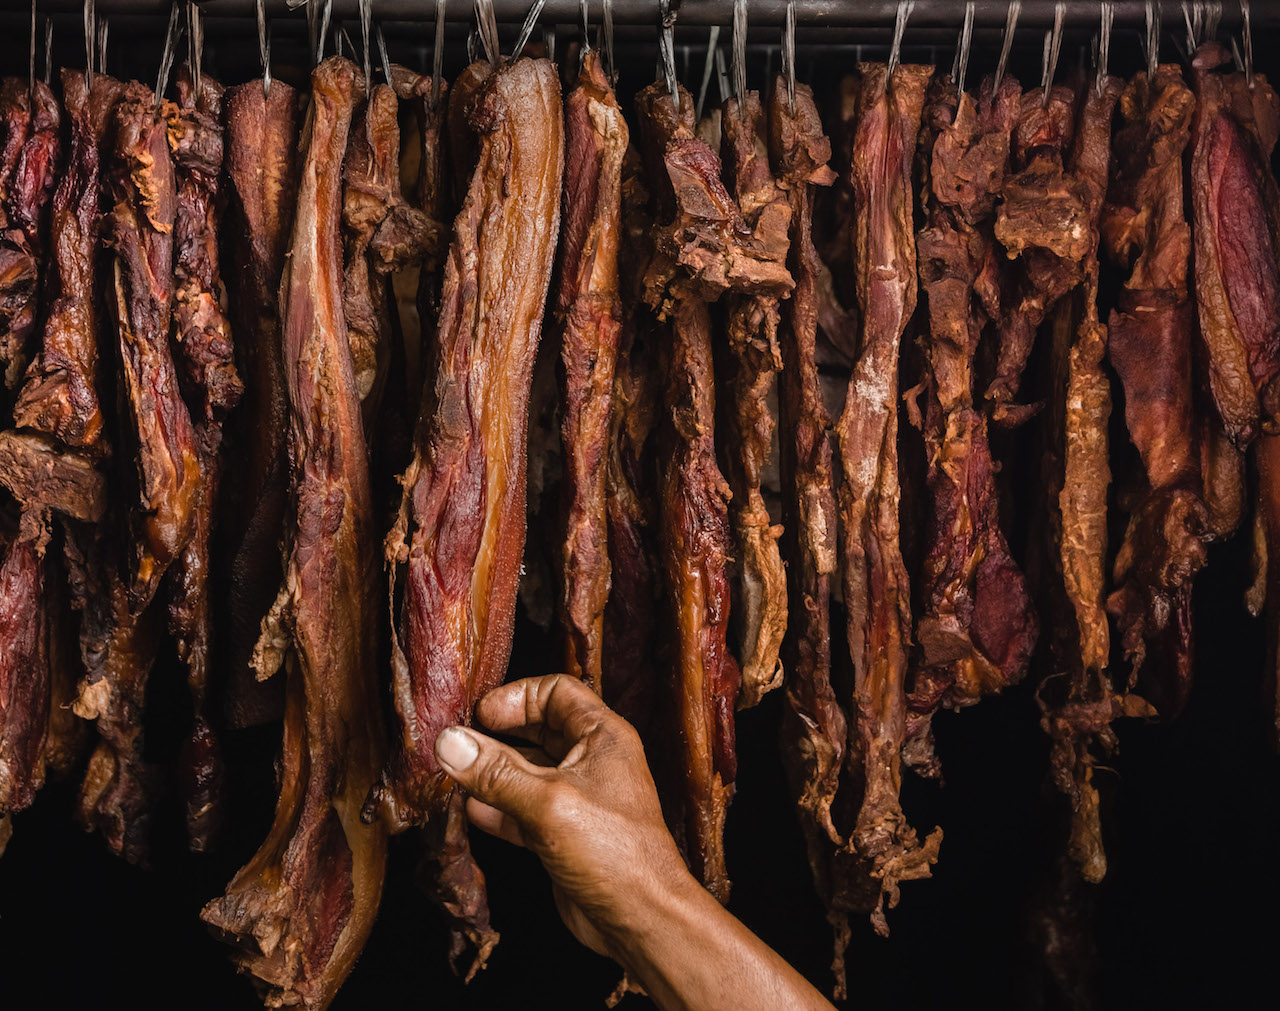 For many tourists, etag is simply cured and smoked meat. But for others, it is so much more than that